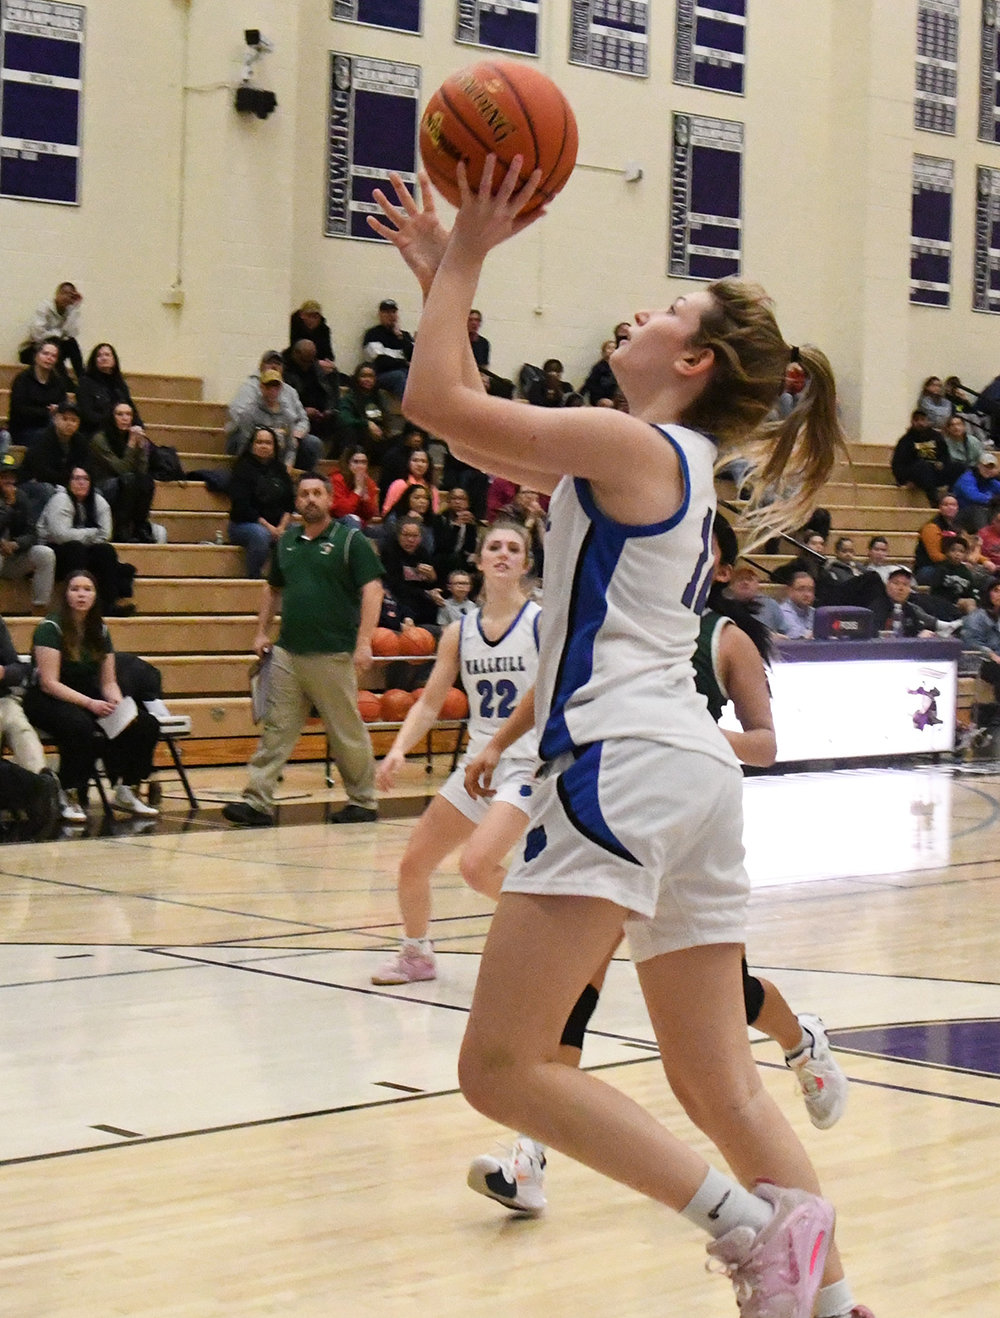 Wallkill's Alex Dembinsky goes up for a basket during Saturday's Section 9 Class A championship girls' basketball game at Monroe-Woodbury High School in Central Valley.